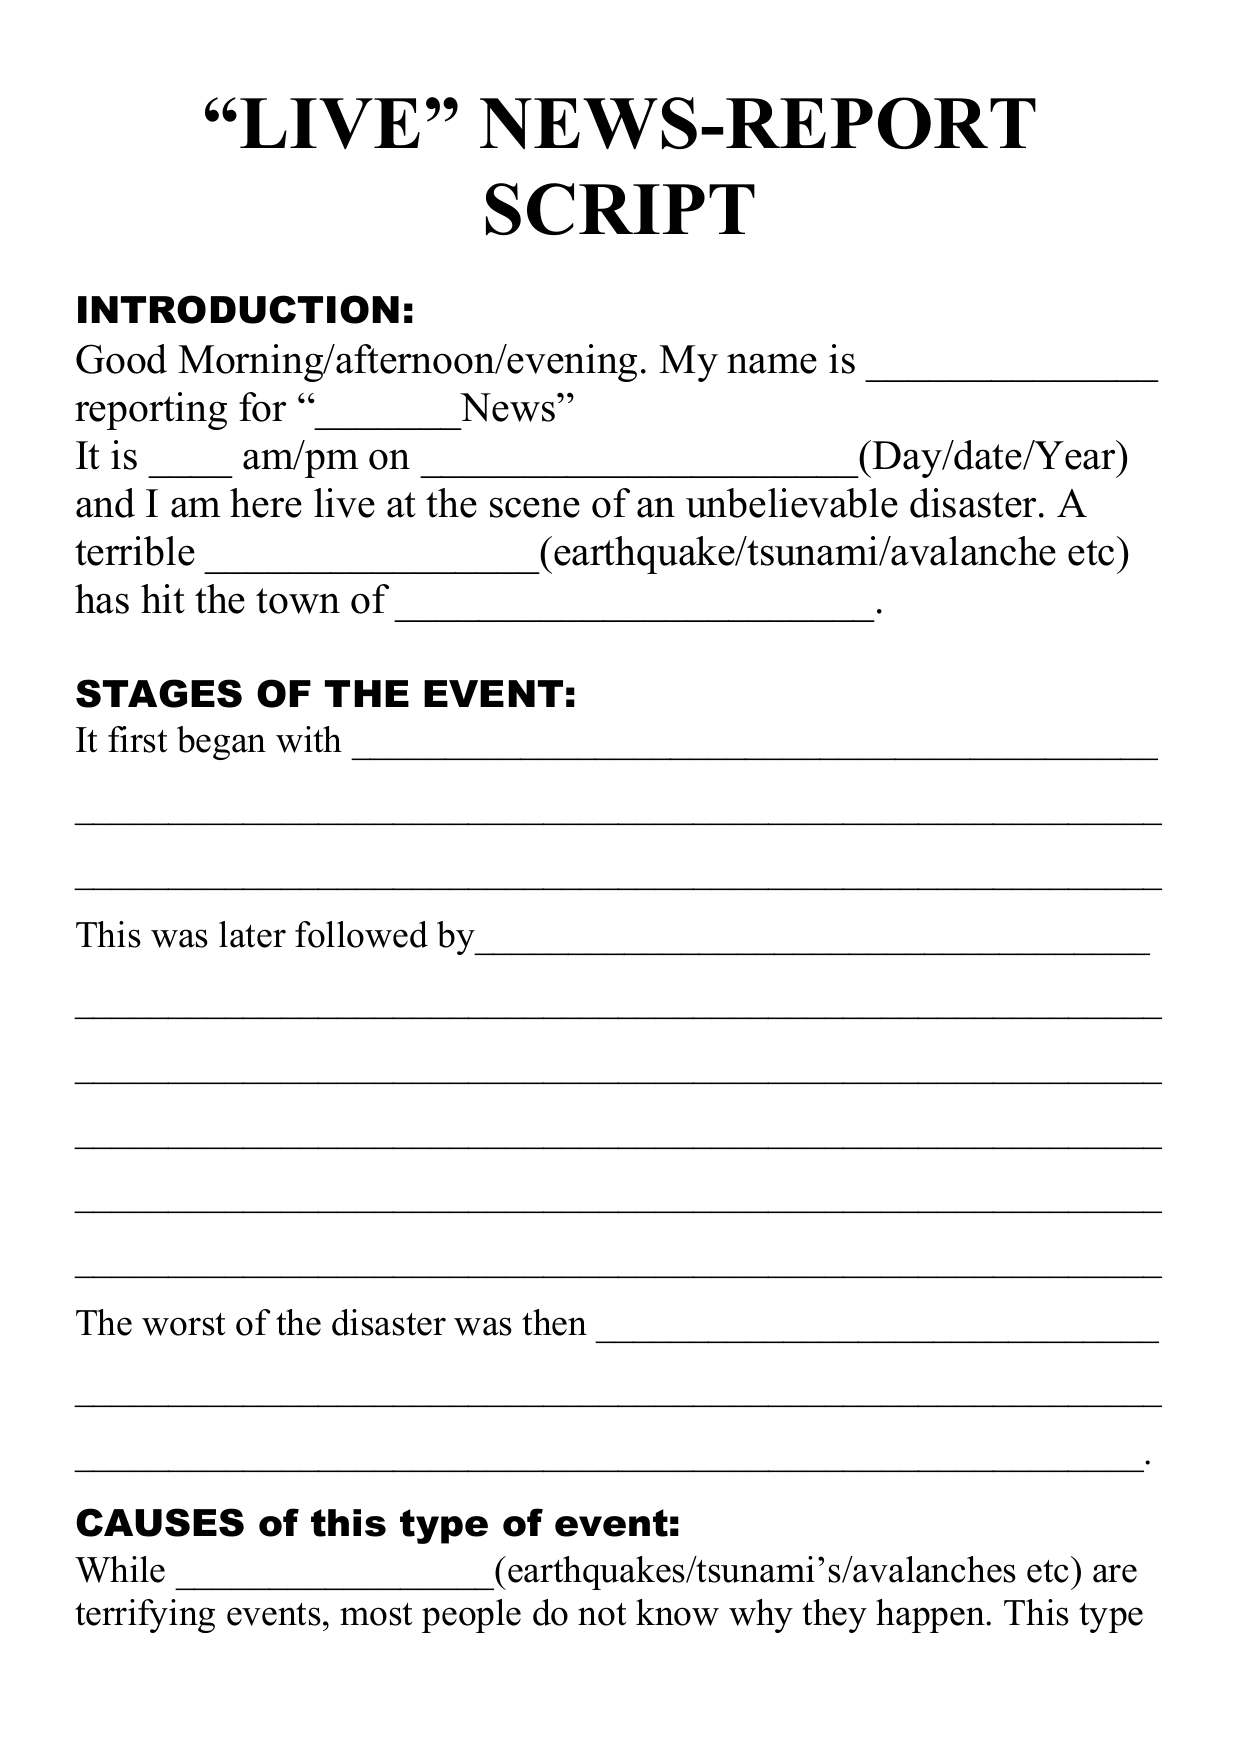 Natural Disaster - Live Newsreport Script Template For News Report Template